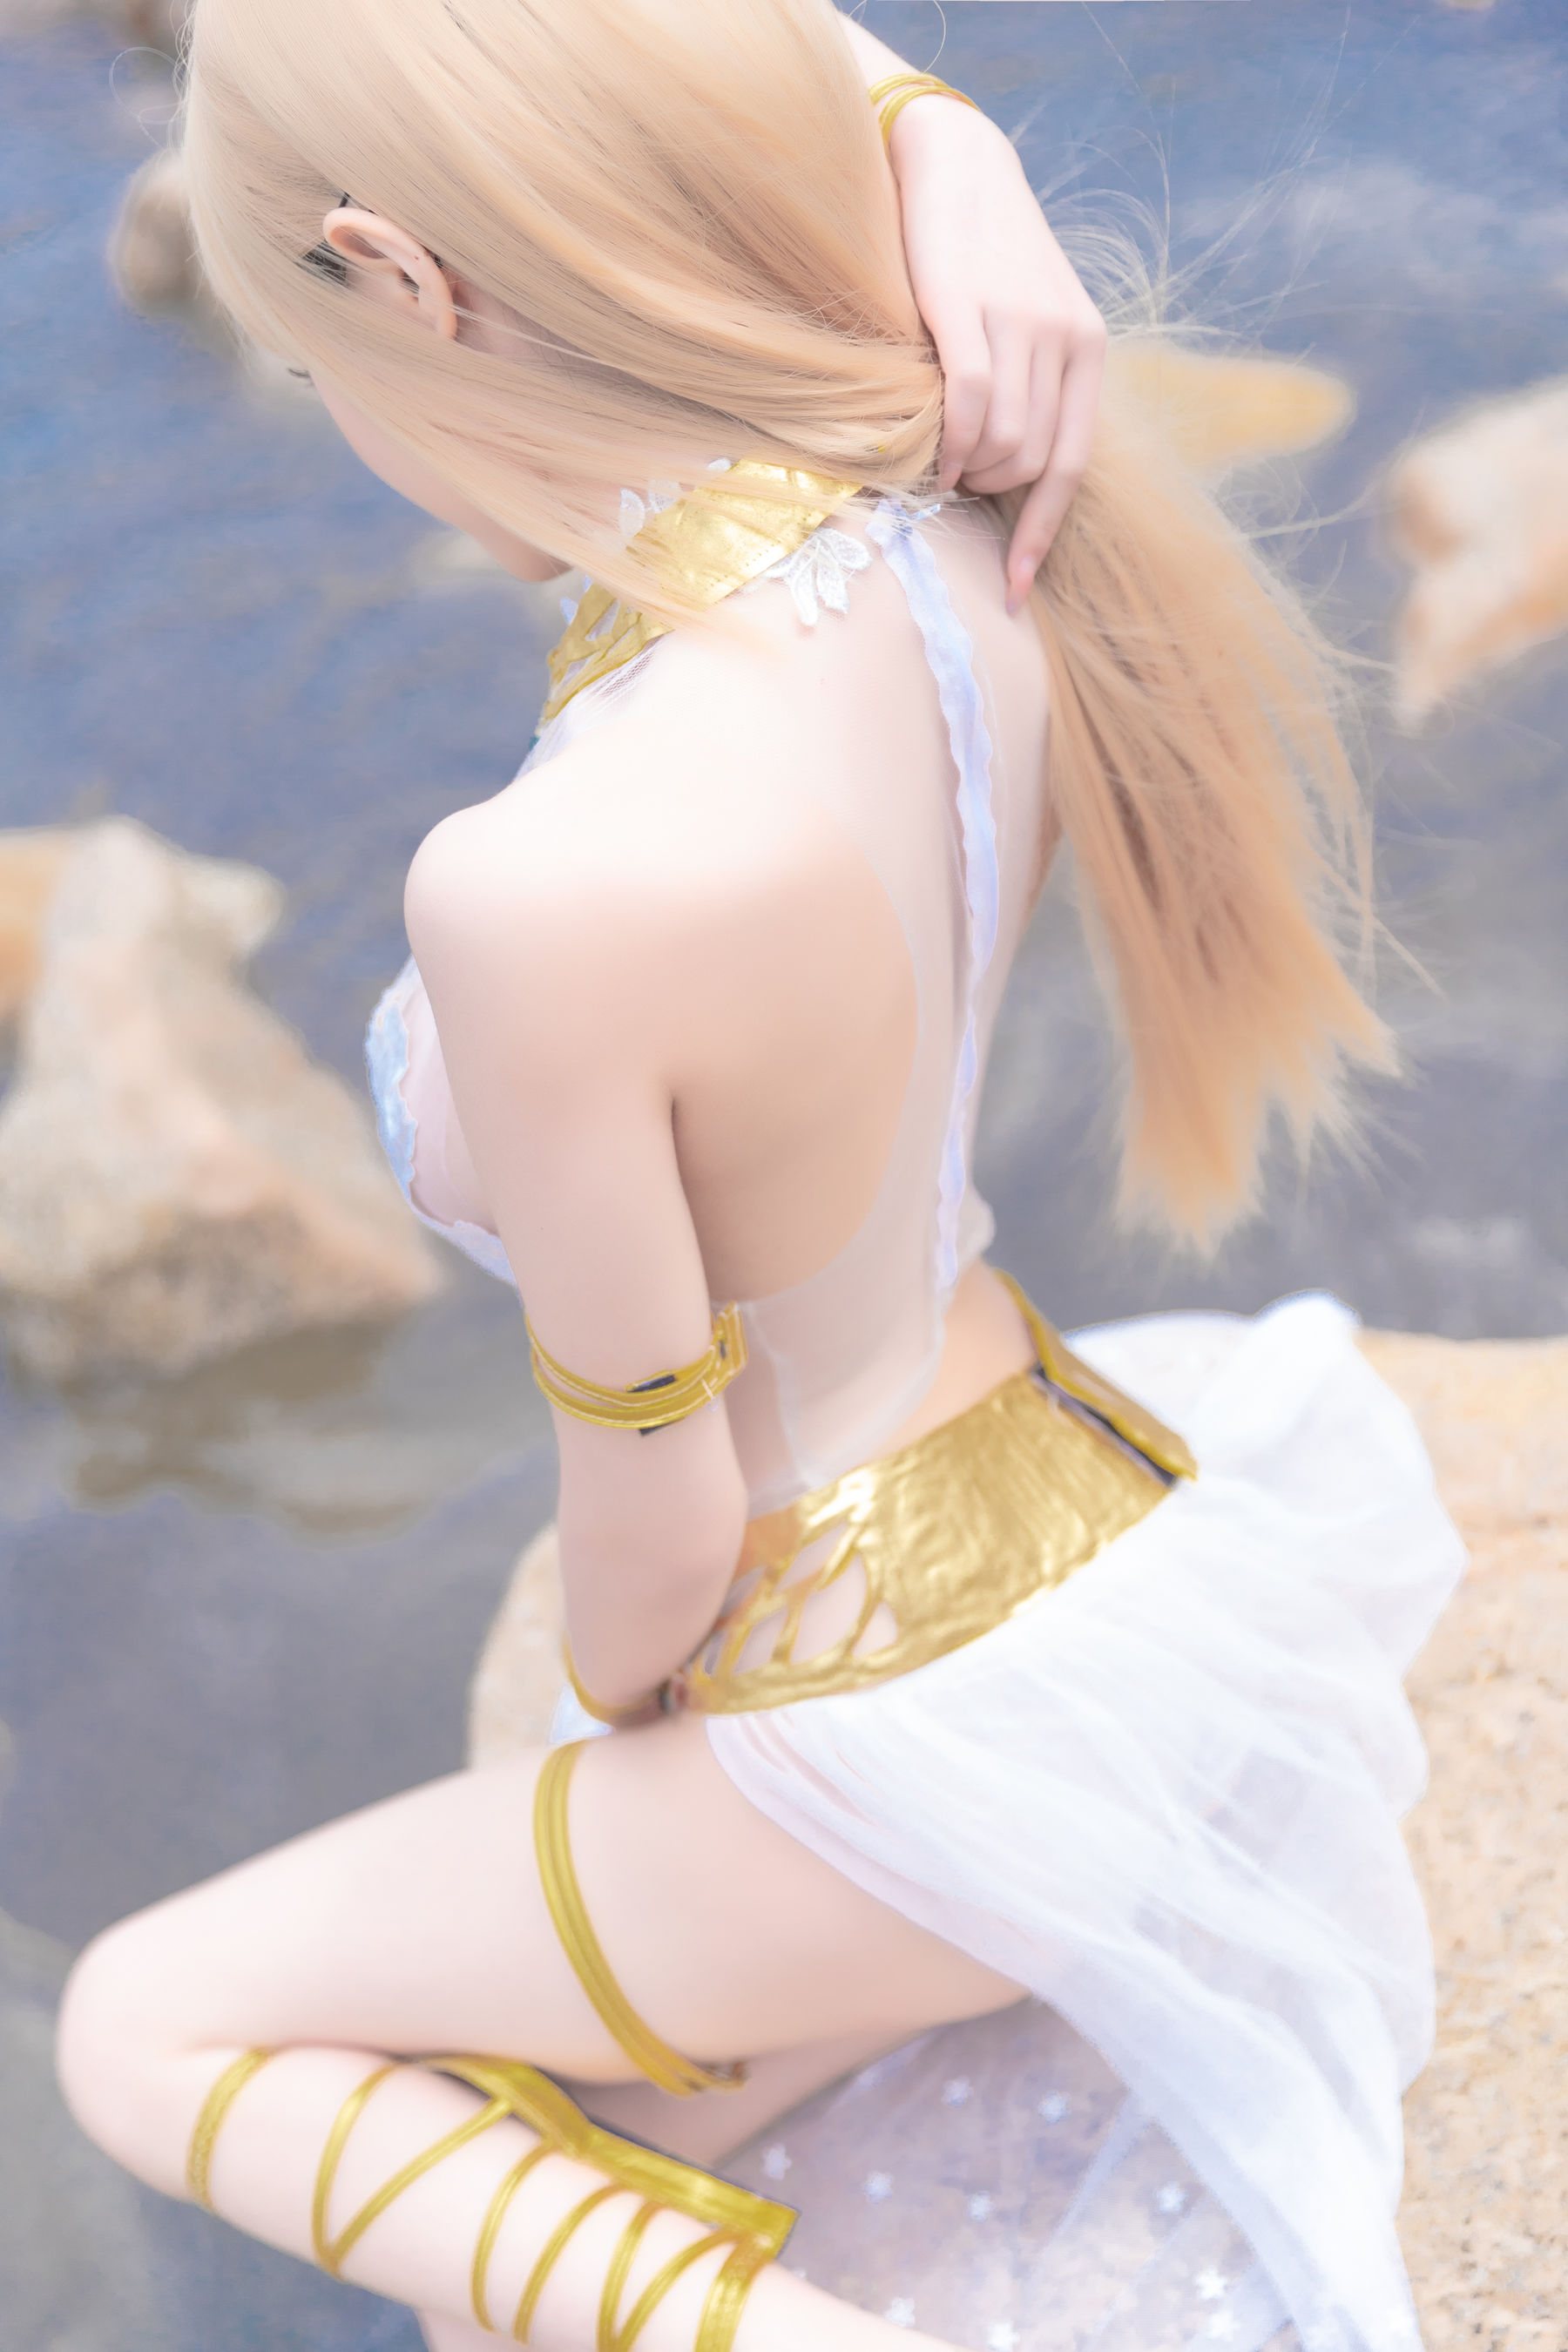 [Net Red COSER Photo] Stunning Shimizu Yuno-Marie Rose White Swimsuit Page 3 No.9ed3d2